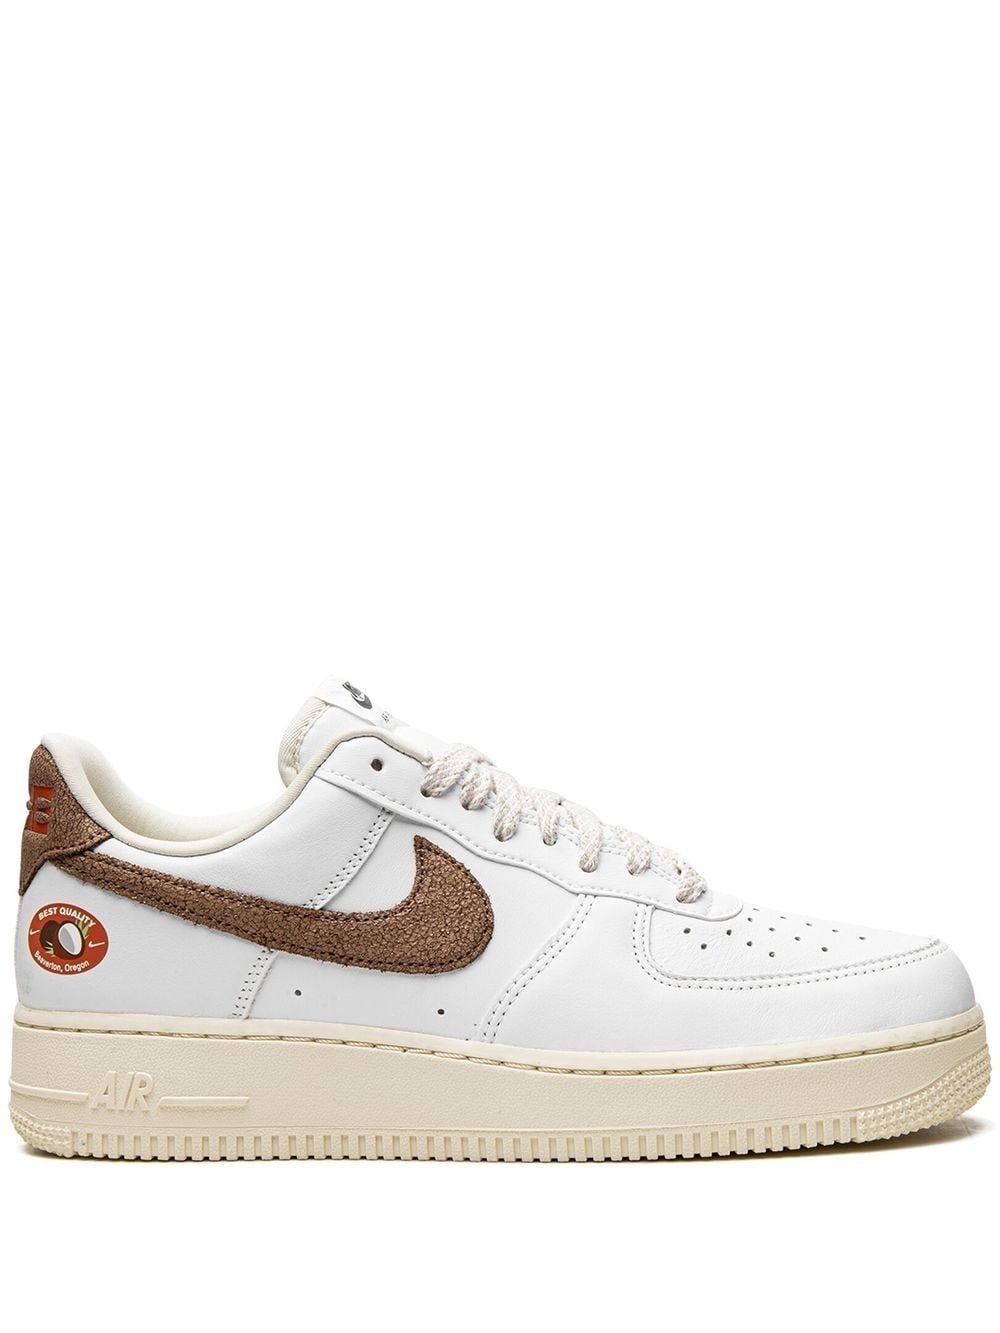 Air Force 1 Low “Coconut” sneakers - 1